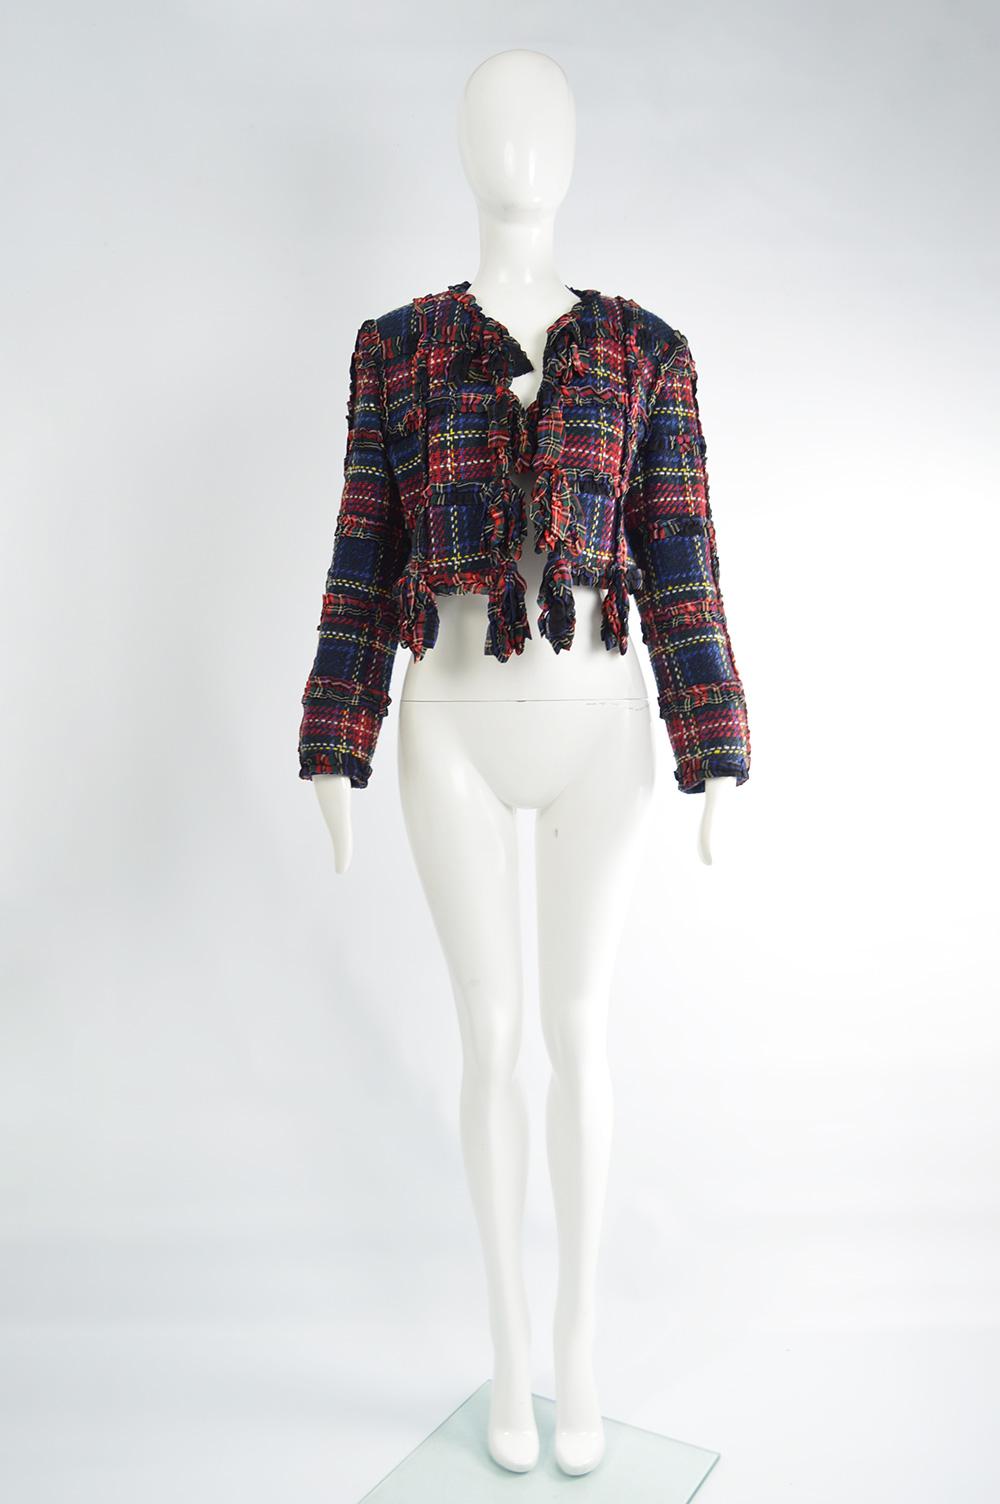 A fabulous vintage Moschino jacket from the autumn winter 1993 collection. In a red, blue and green tartan plaid checked wool with a boxy shape and ruffled ribbons.

Size: Marked I 42 but fits more like a modern UK 8-10/ US 4-6/ EU 36-38. Please